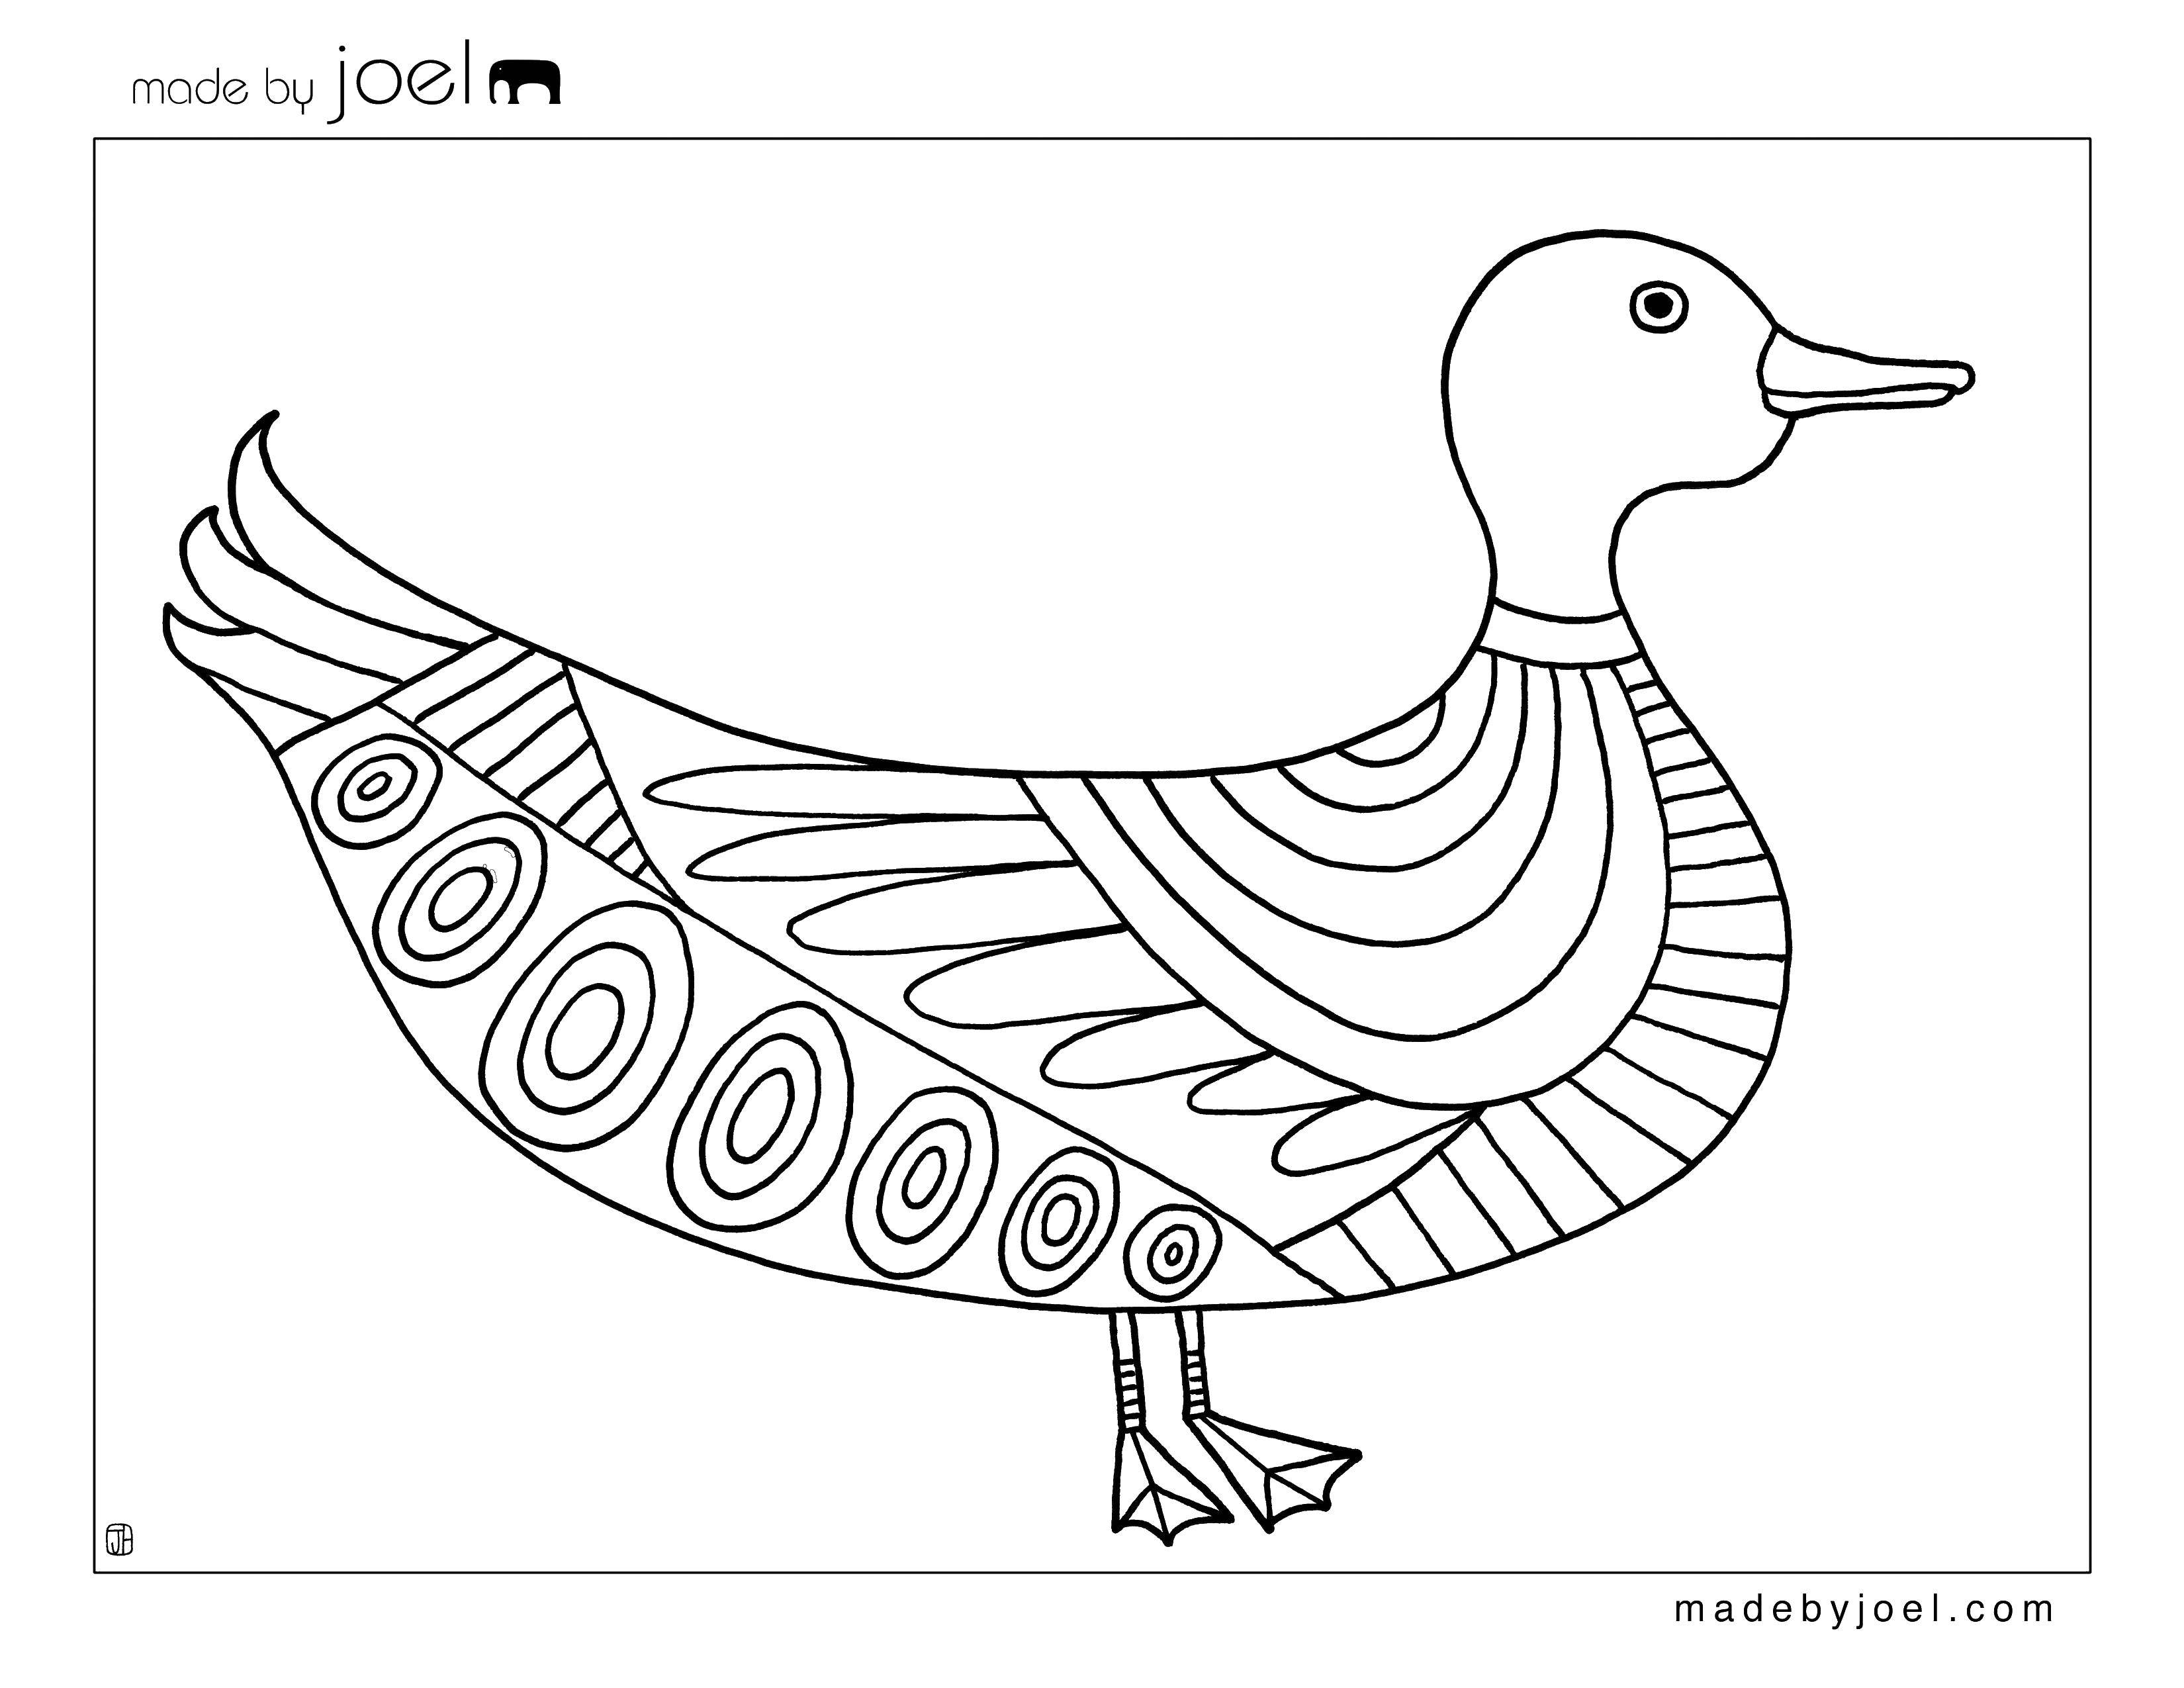 Coloring Patterned duck. Category patterns. Tags:  Patterns, animals.